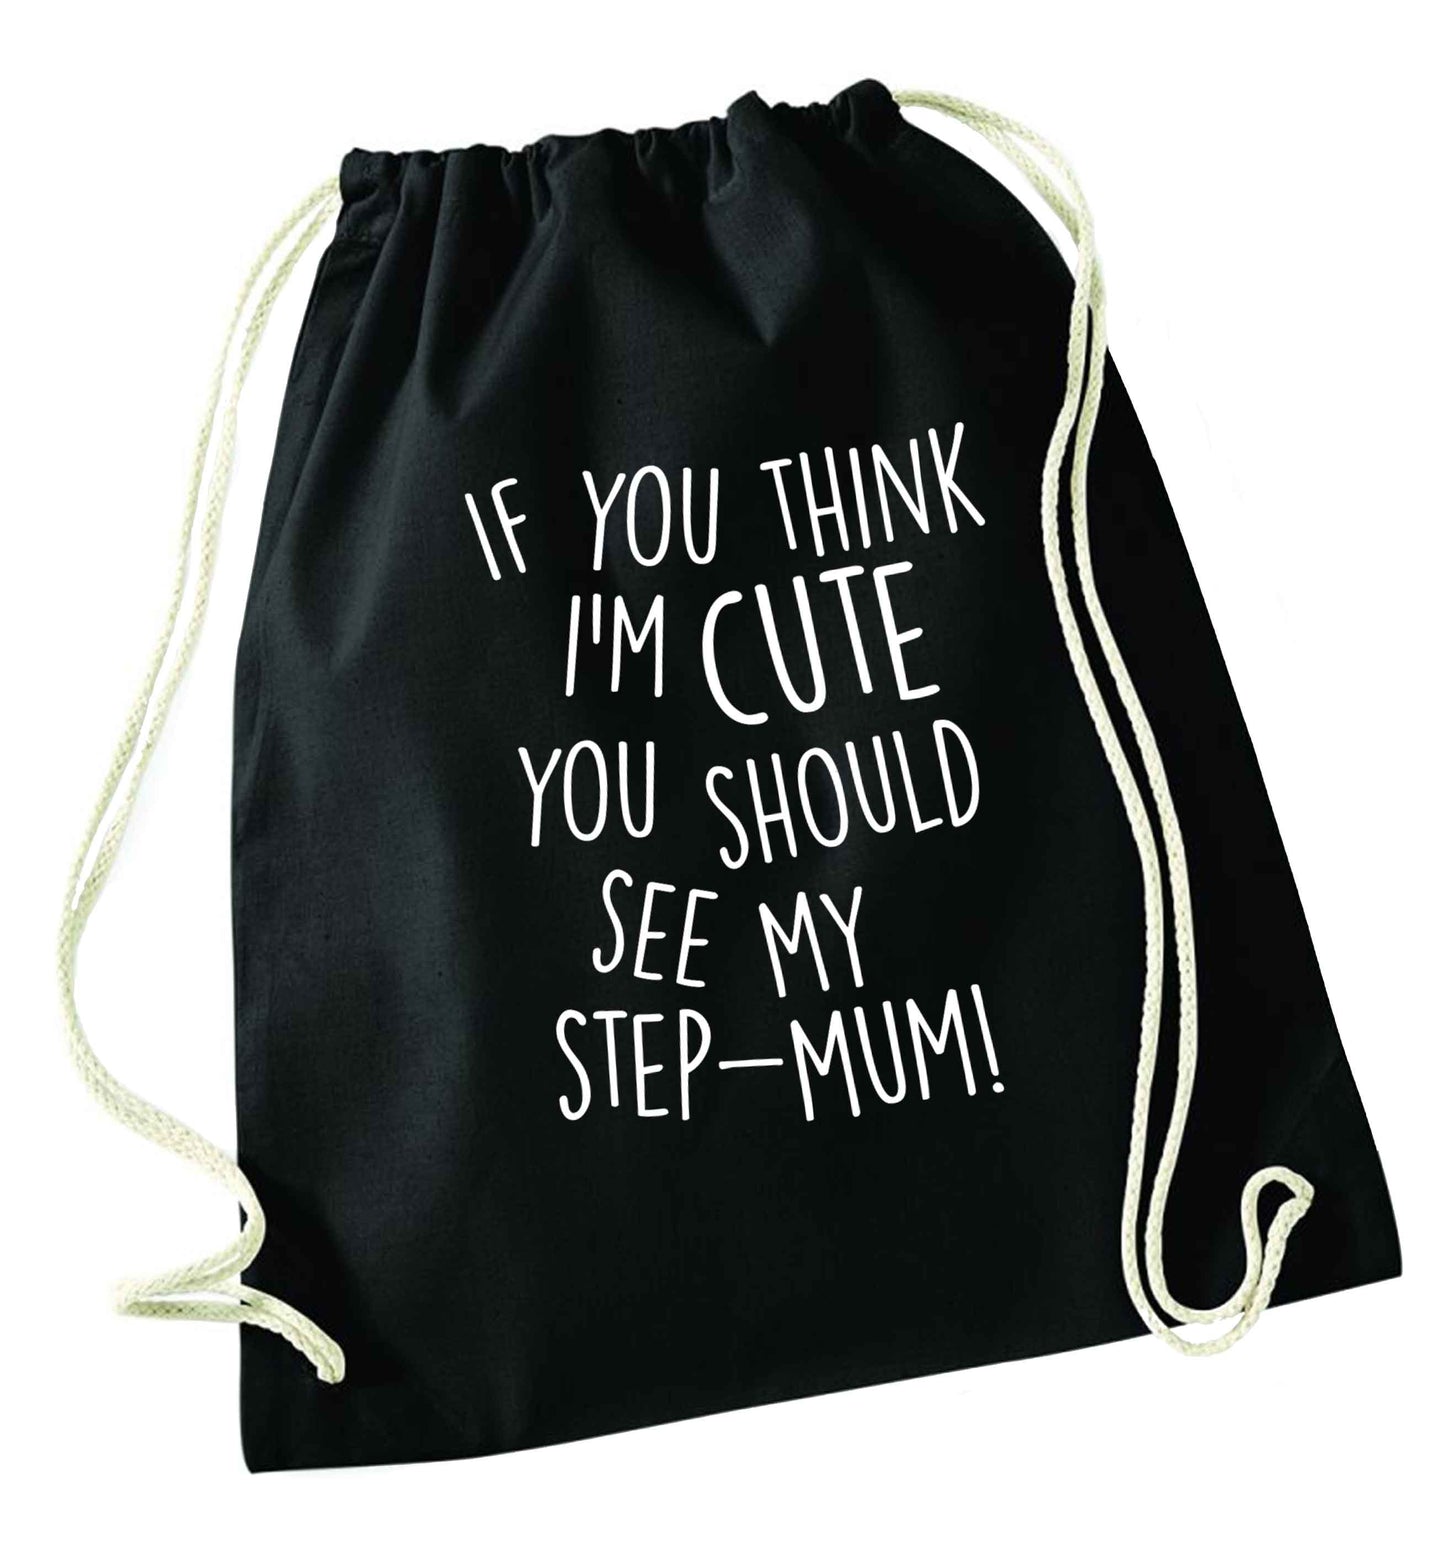 My step-mum loves me to the moon and back black drawstring bag